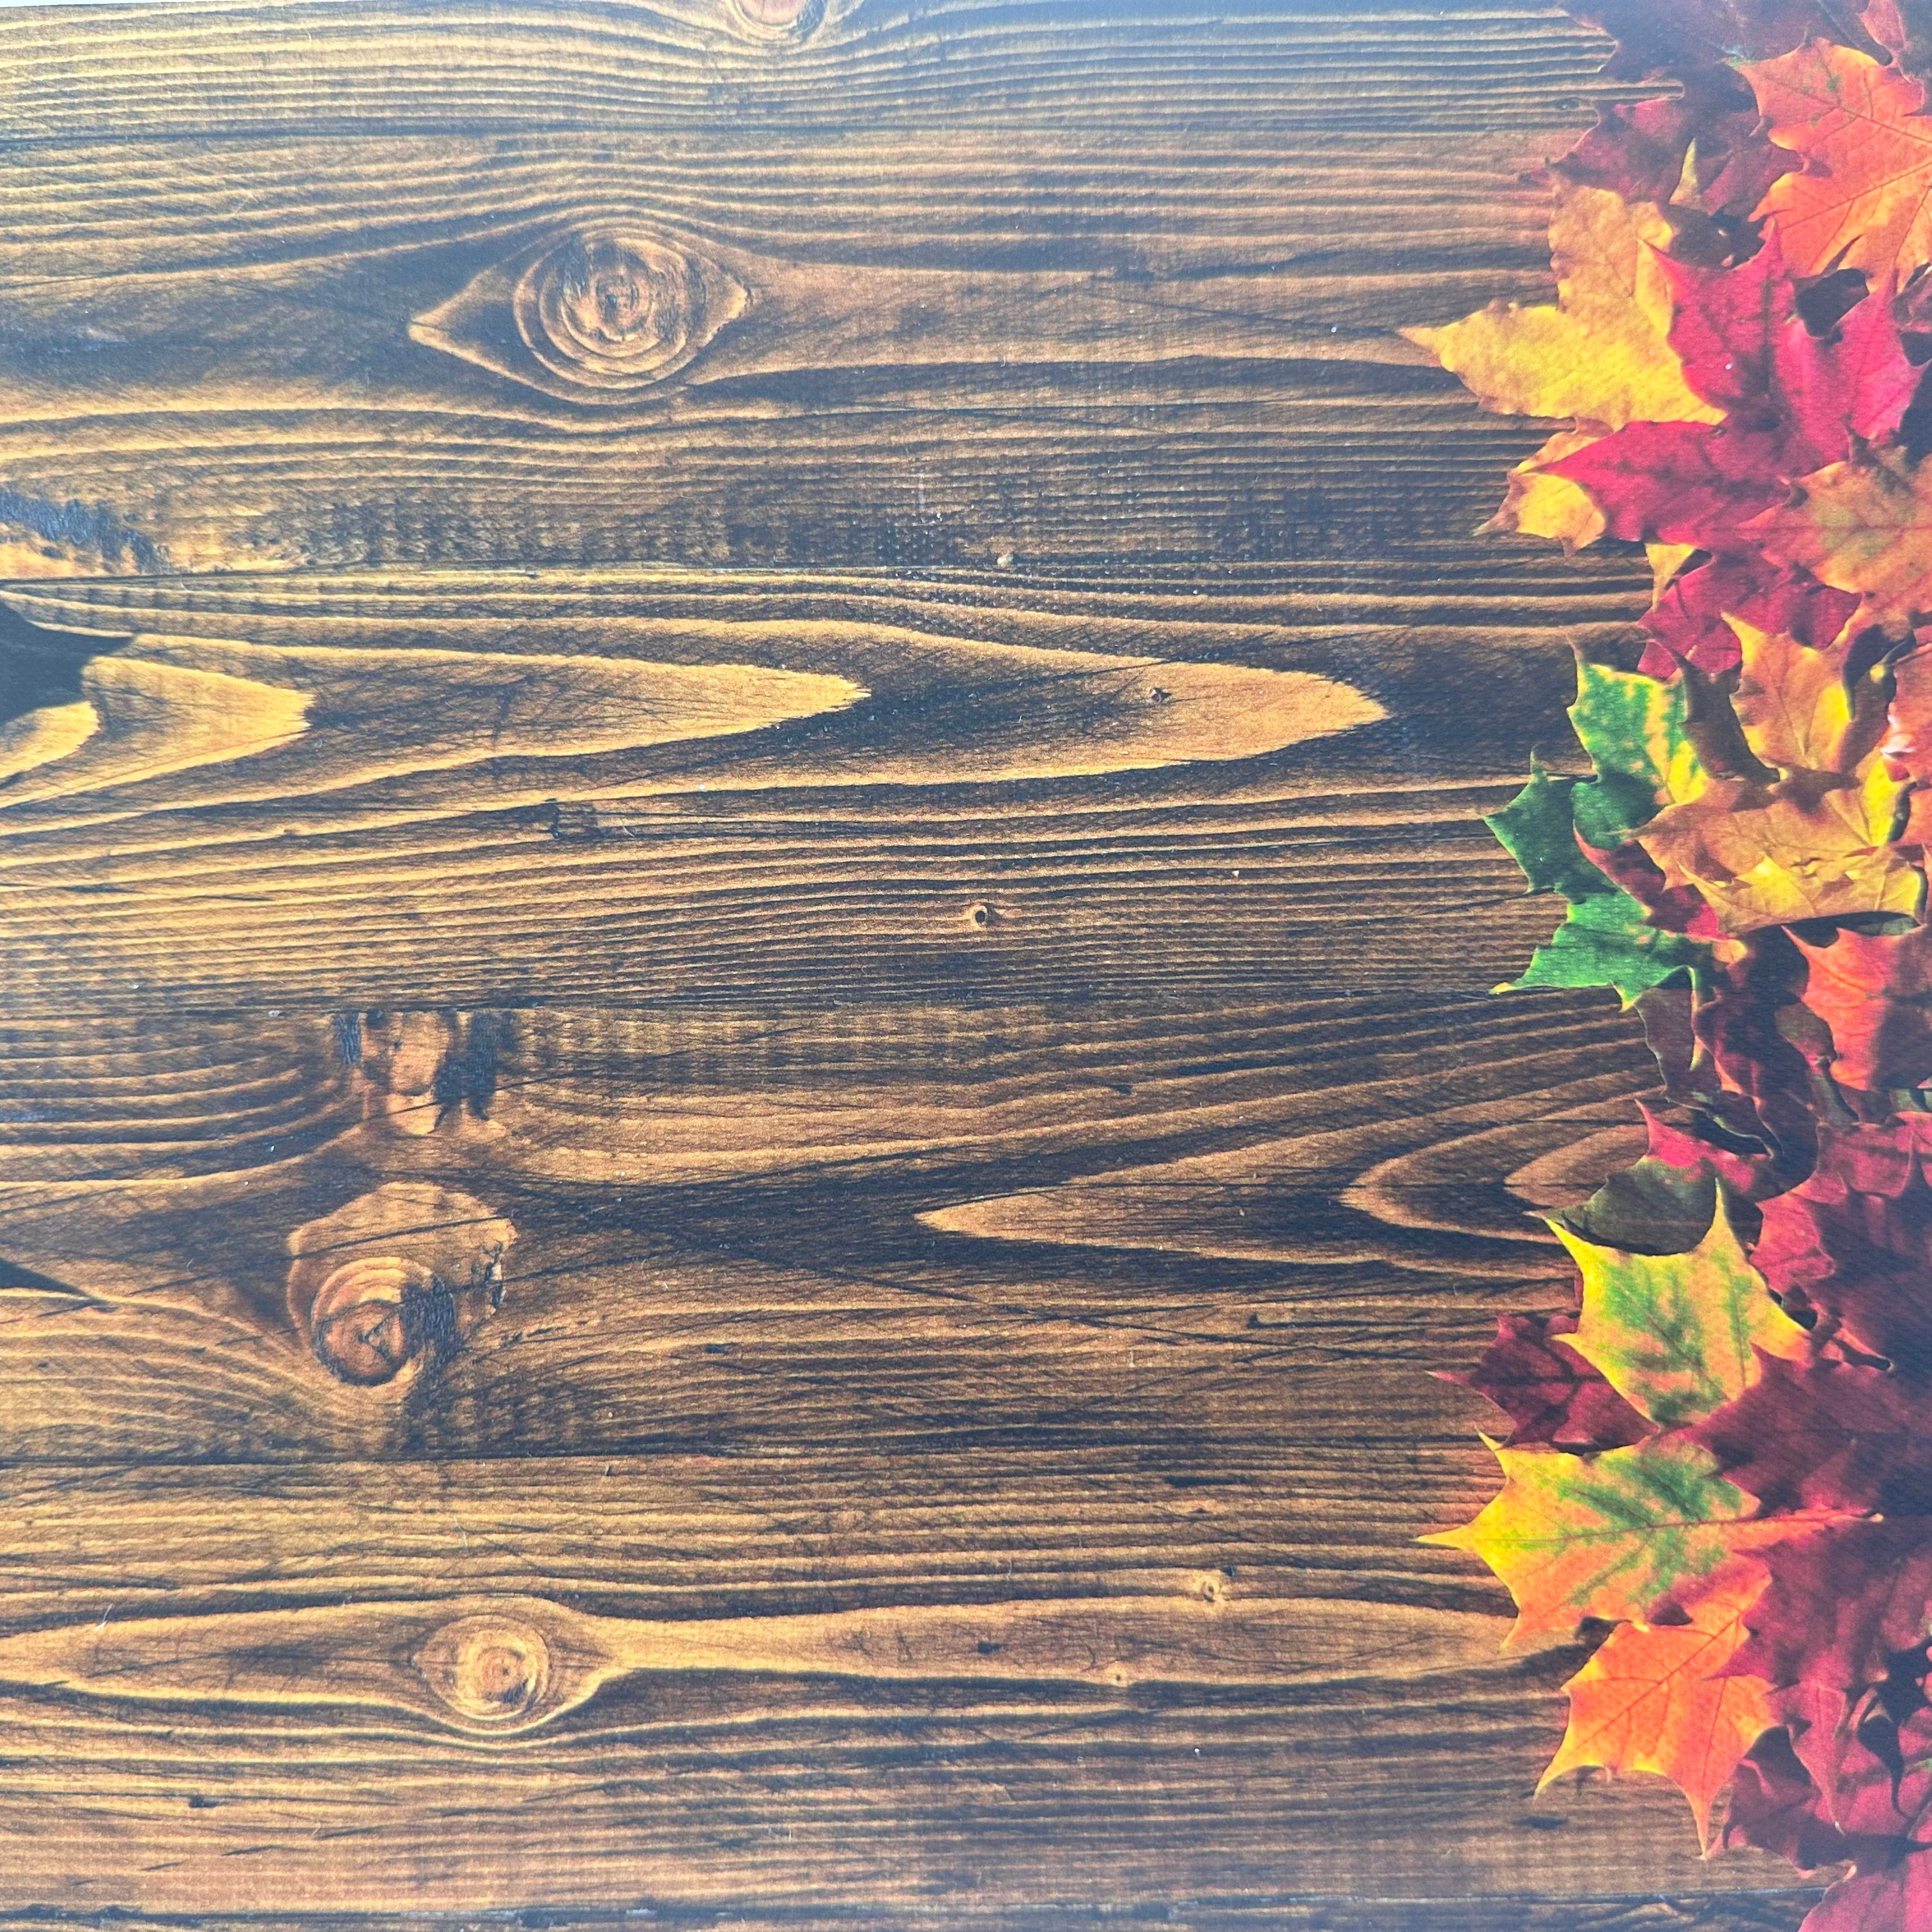 Fallen Autumn Leaves Wooden Effect Canvas Photography Background